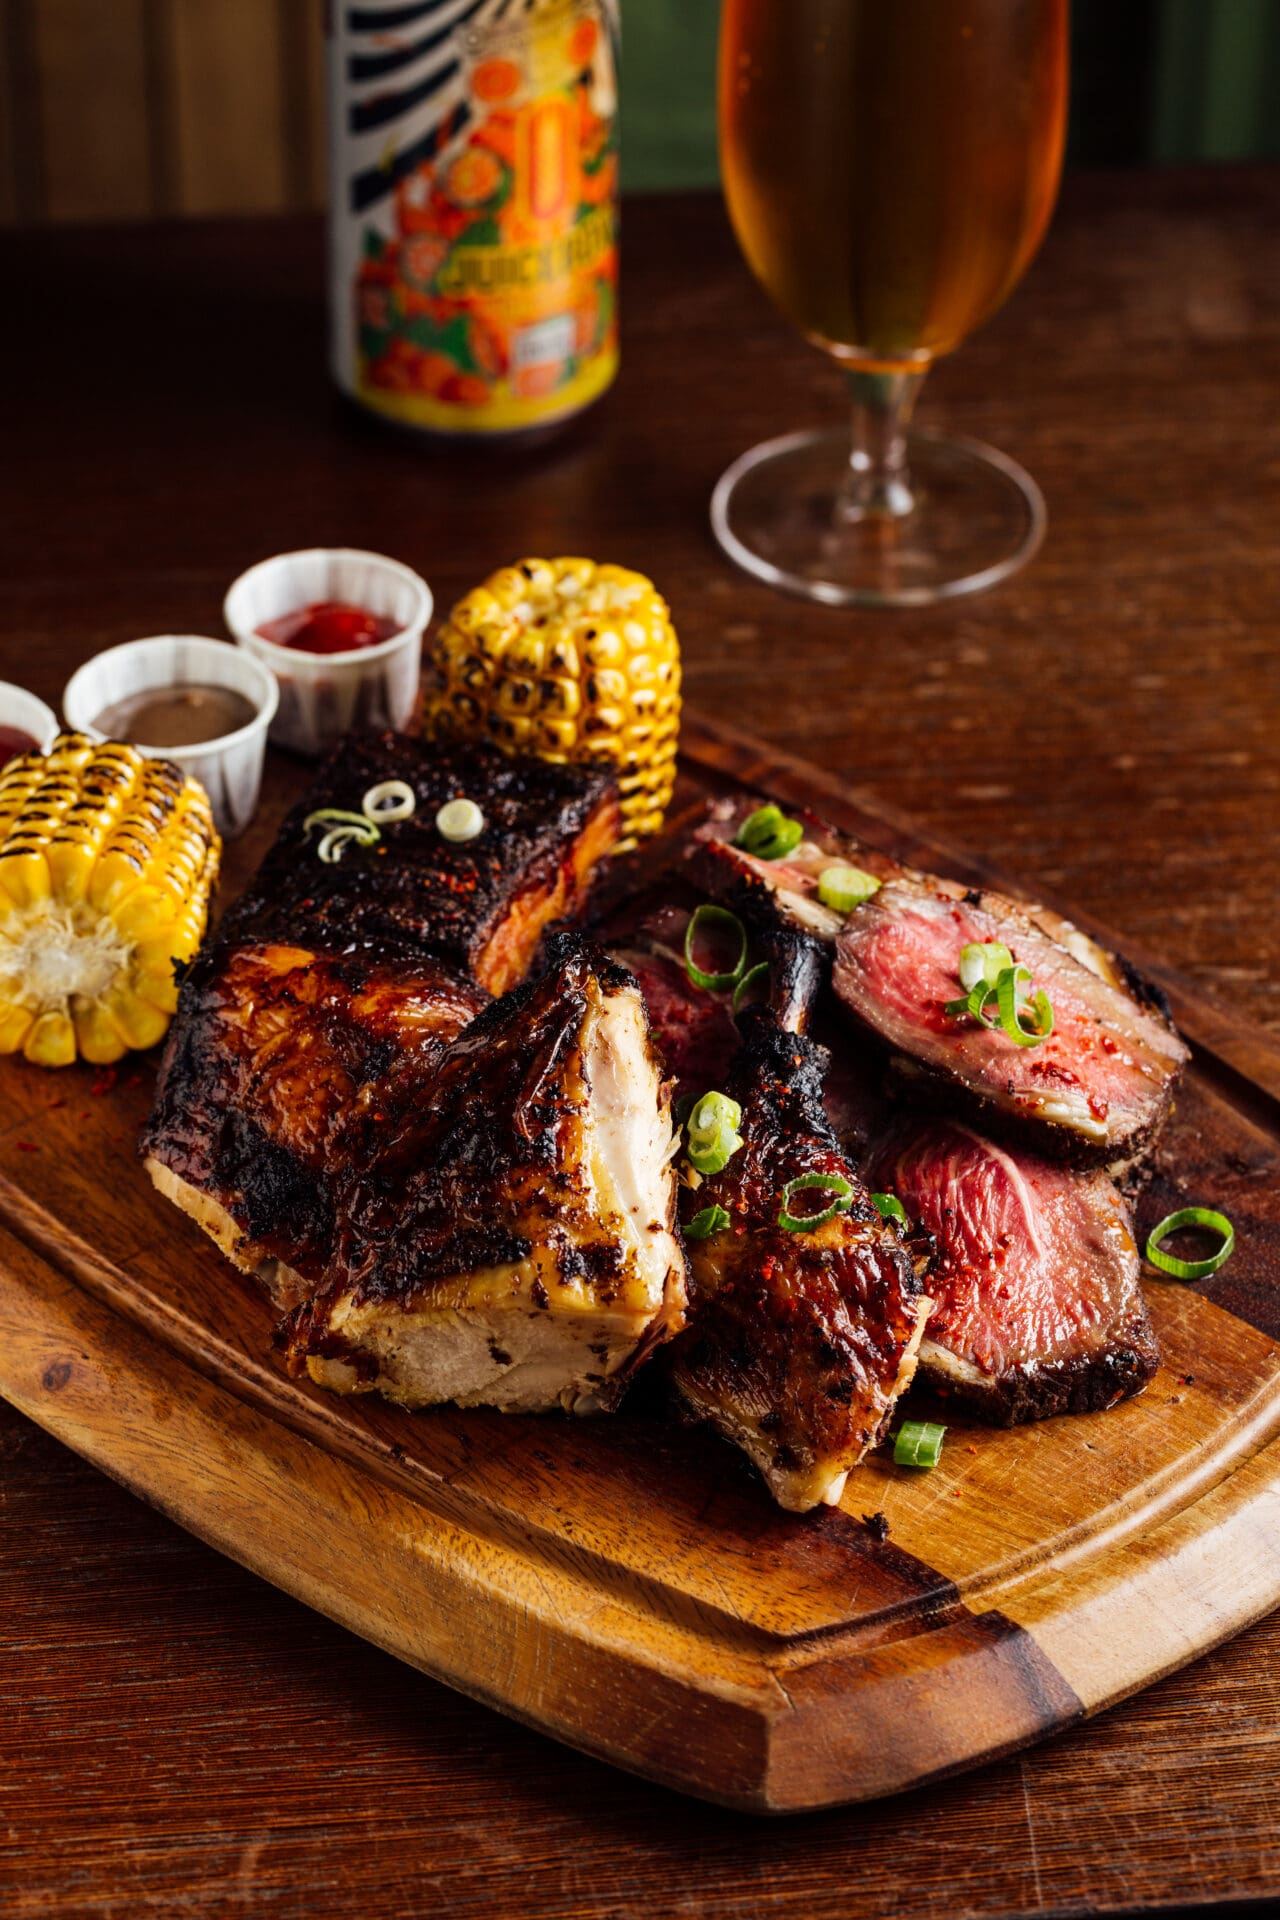 London's Caribbean community | Jerk-marinaded meat served on a wooden board with corn on the cob and a can and a cold glass of beer in the background